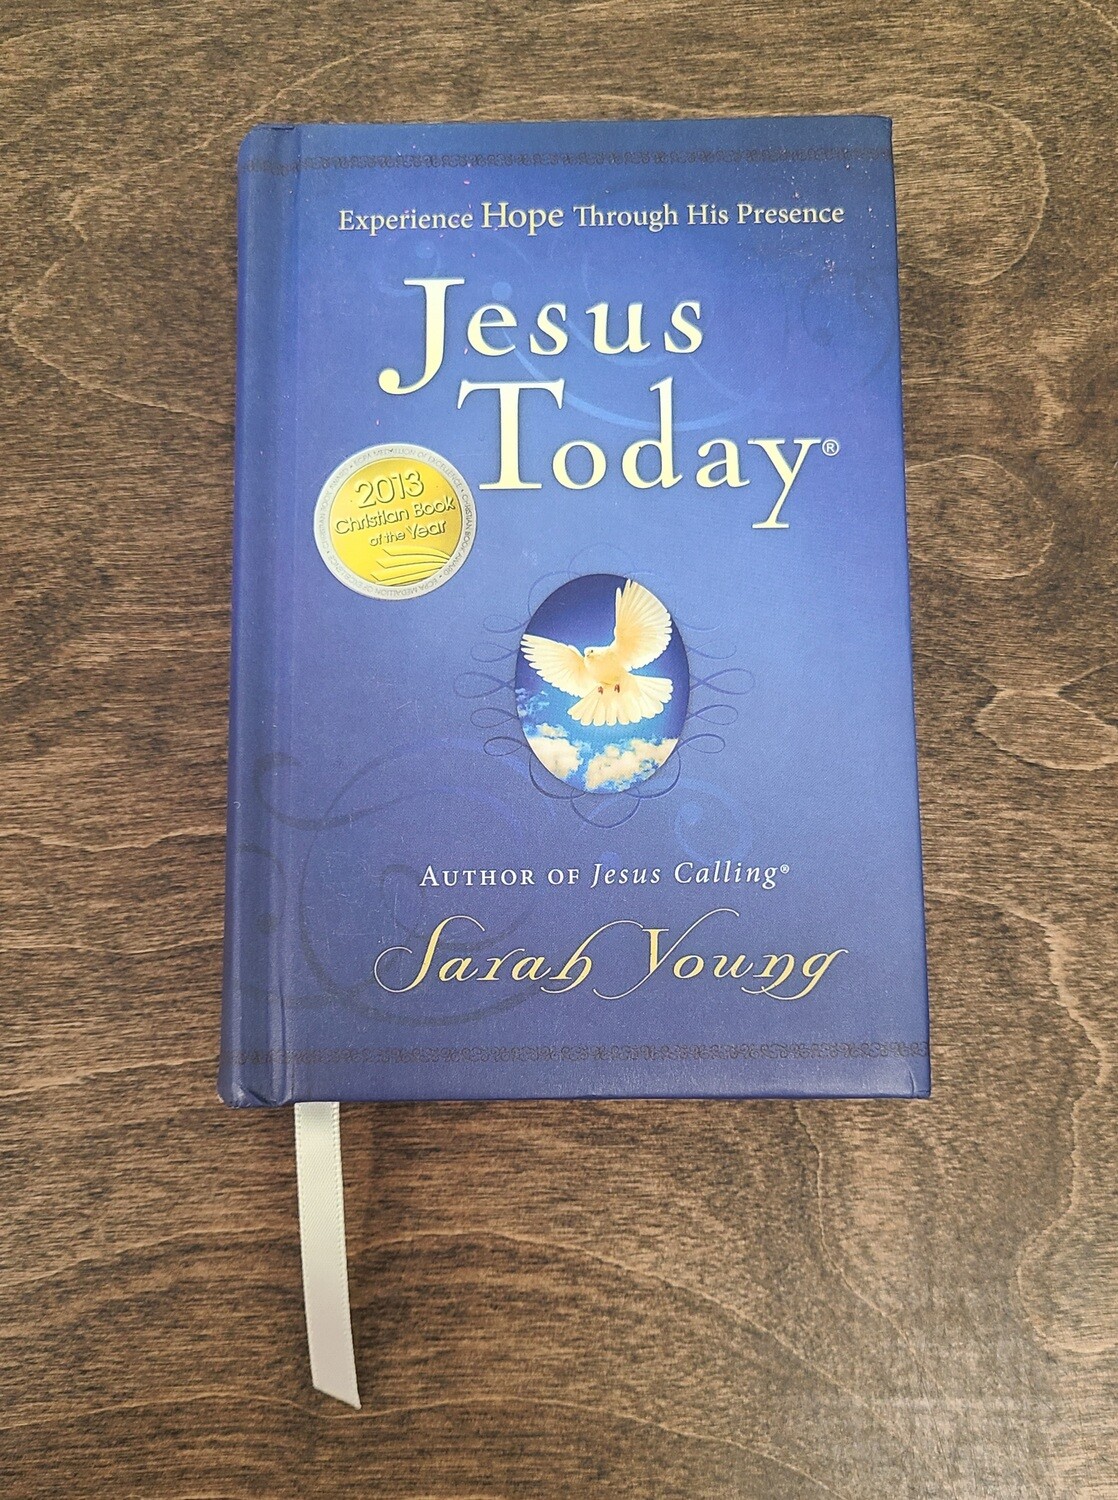 Jesus Today by Sarah Young